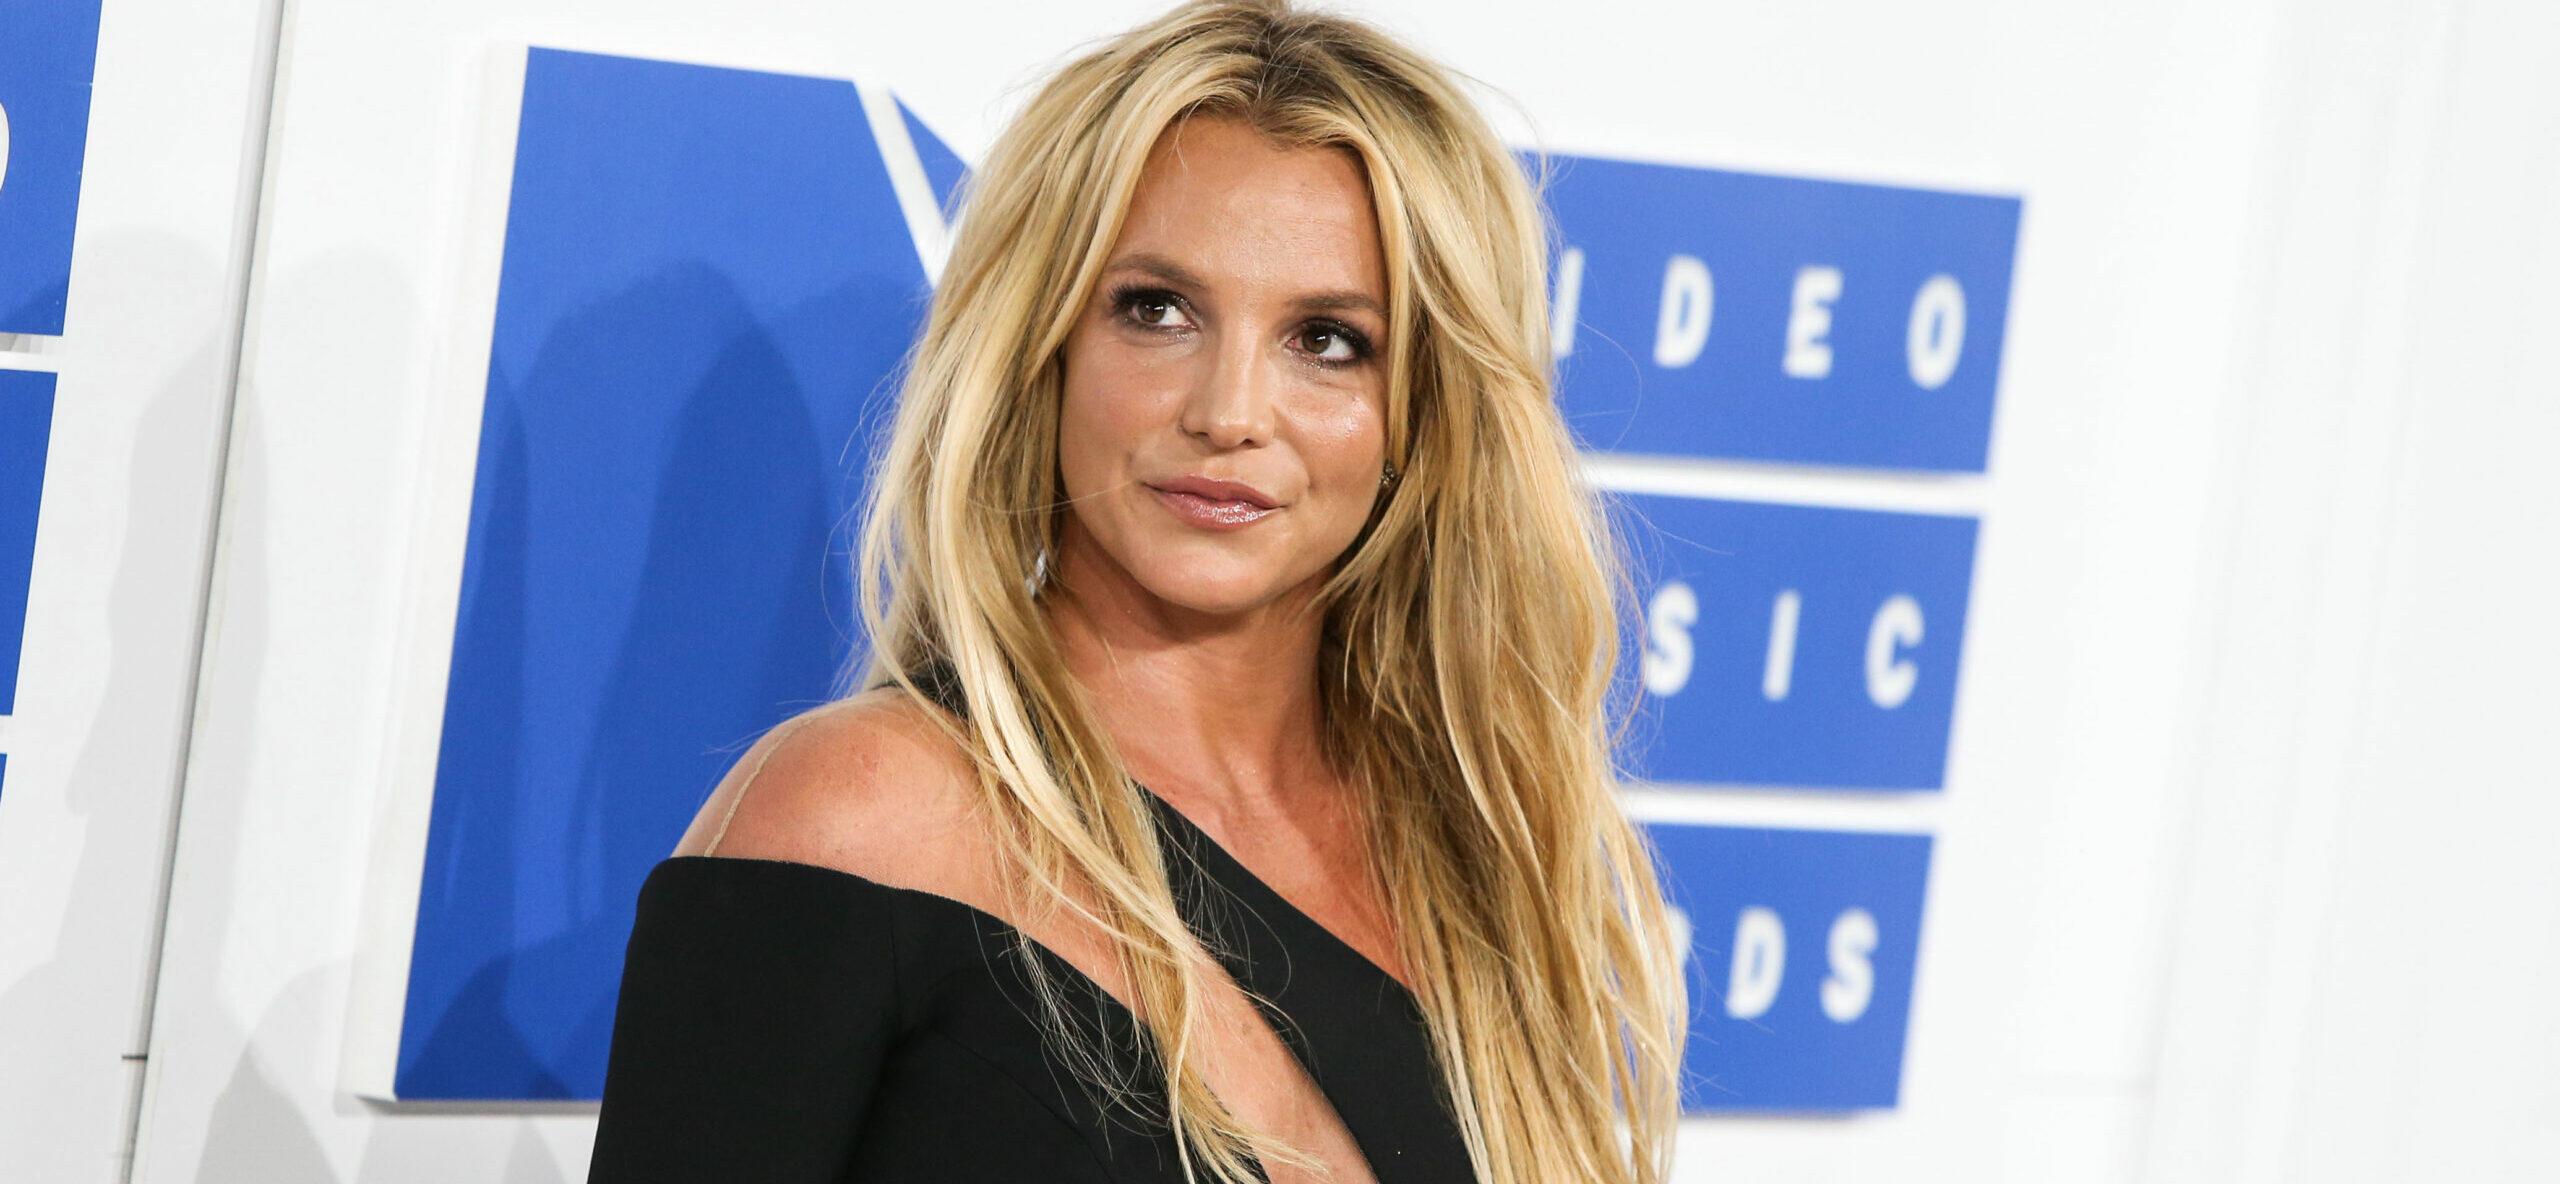 Britney Spears Reveals She Wasn’t Allowed To Perform New Songs During Conservatorship